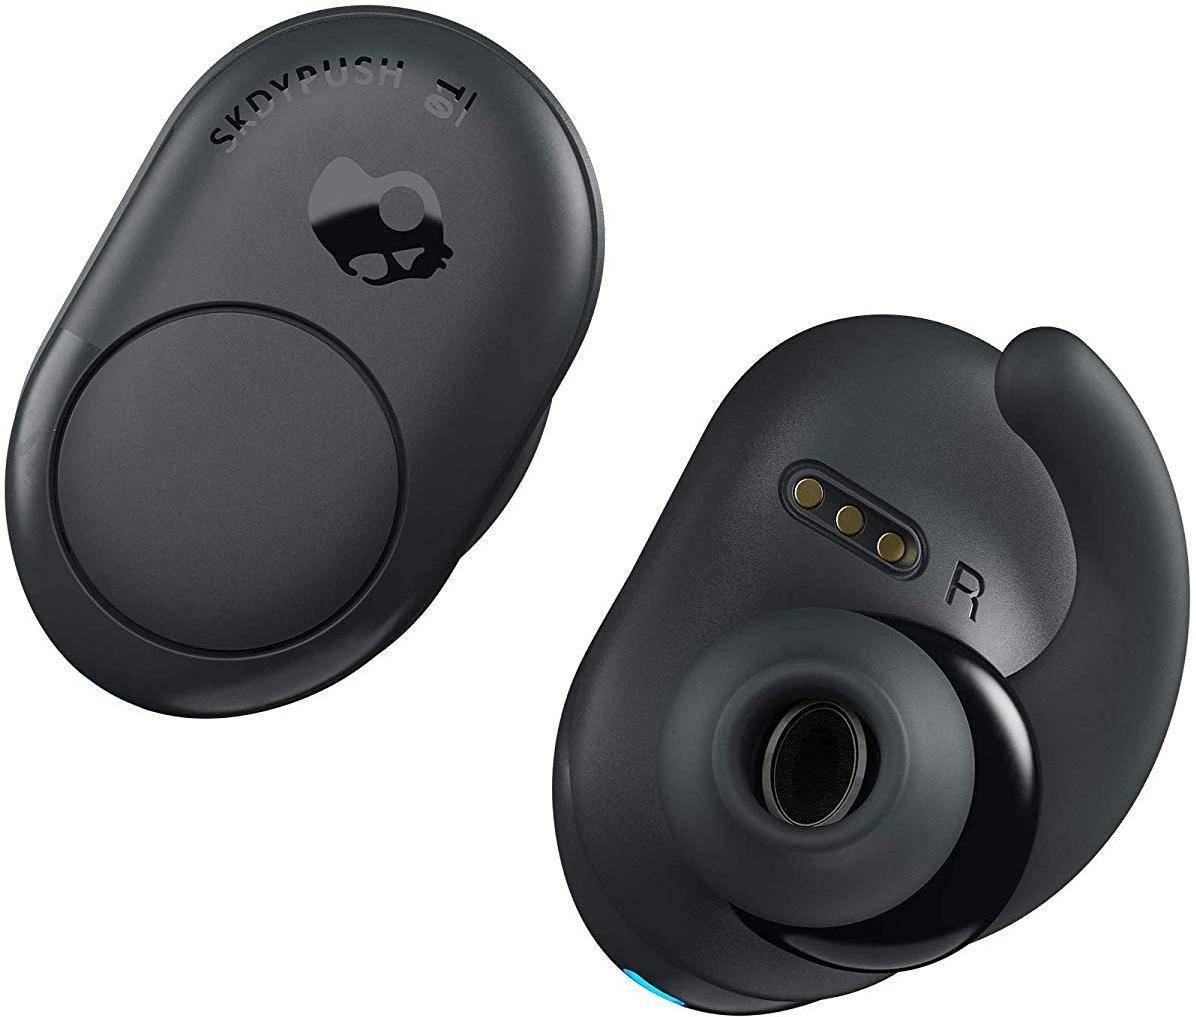 Buy Skullcandy Push True Wireless Earbuds Online In India At Lowest